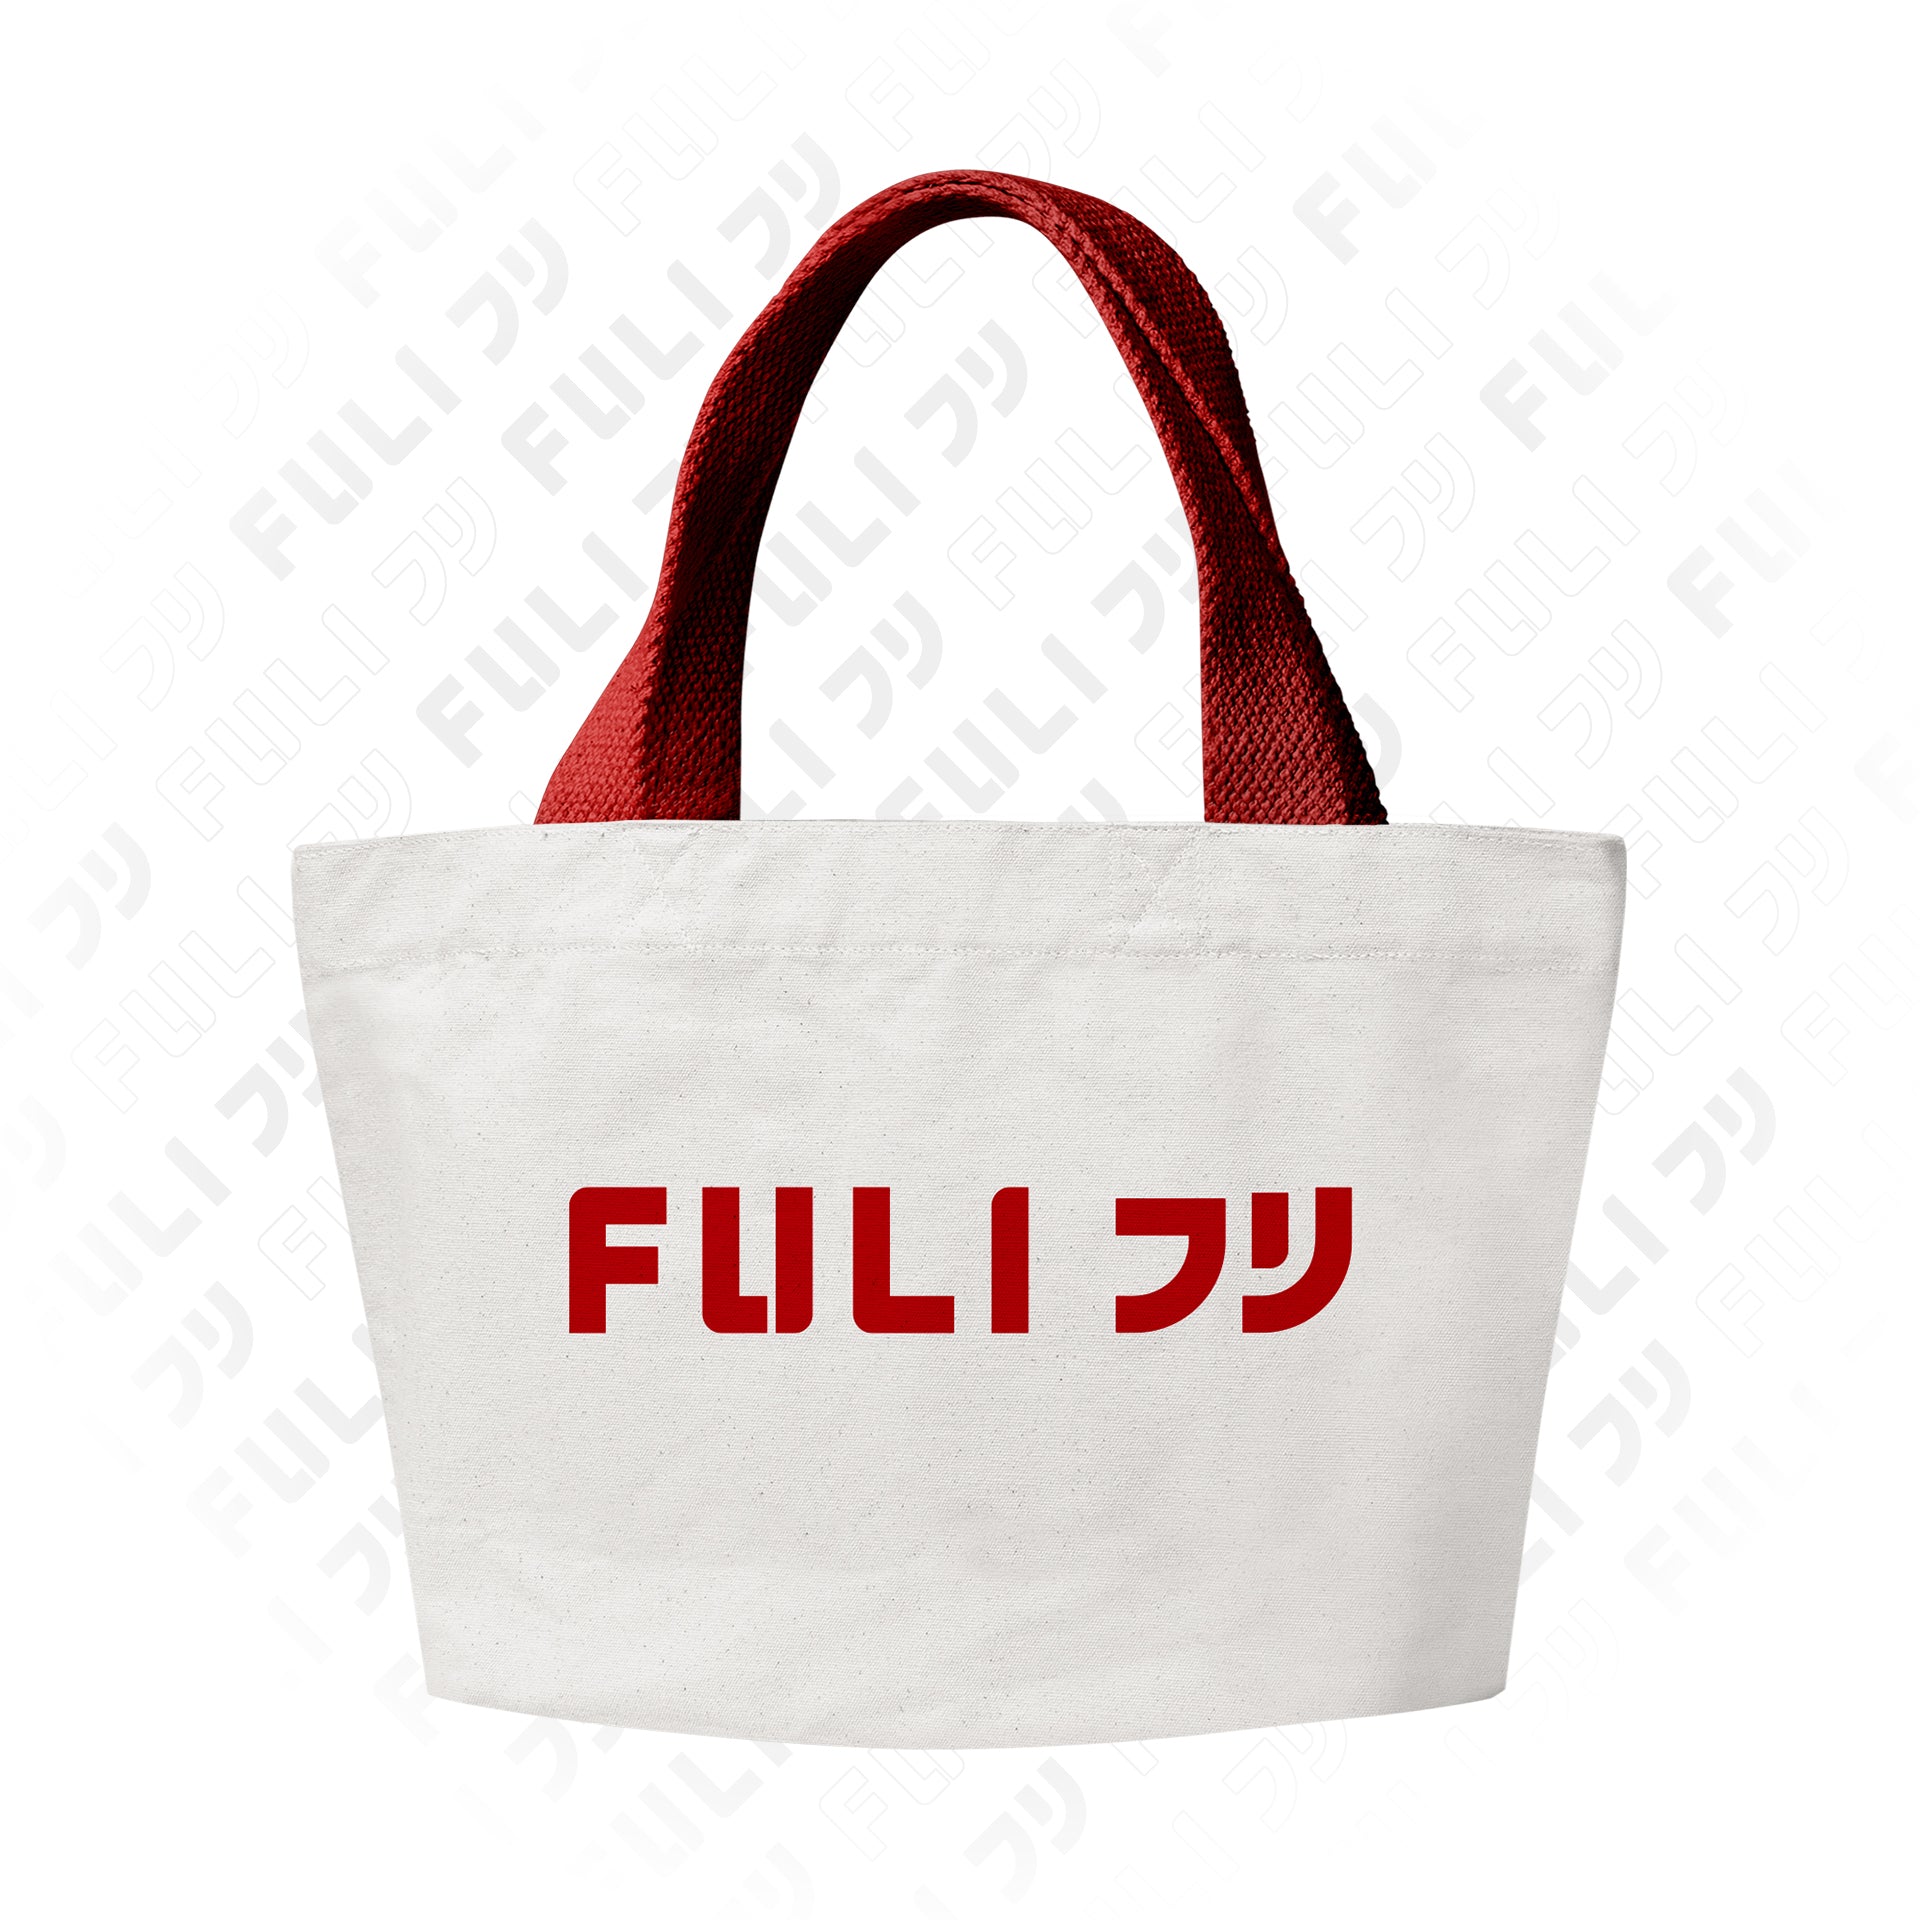 [Event] กระเป๋าผ้า Canvas สีขาว | FULI Canvas Tote Bags S - White